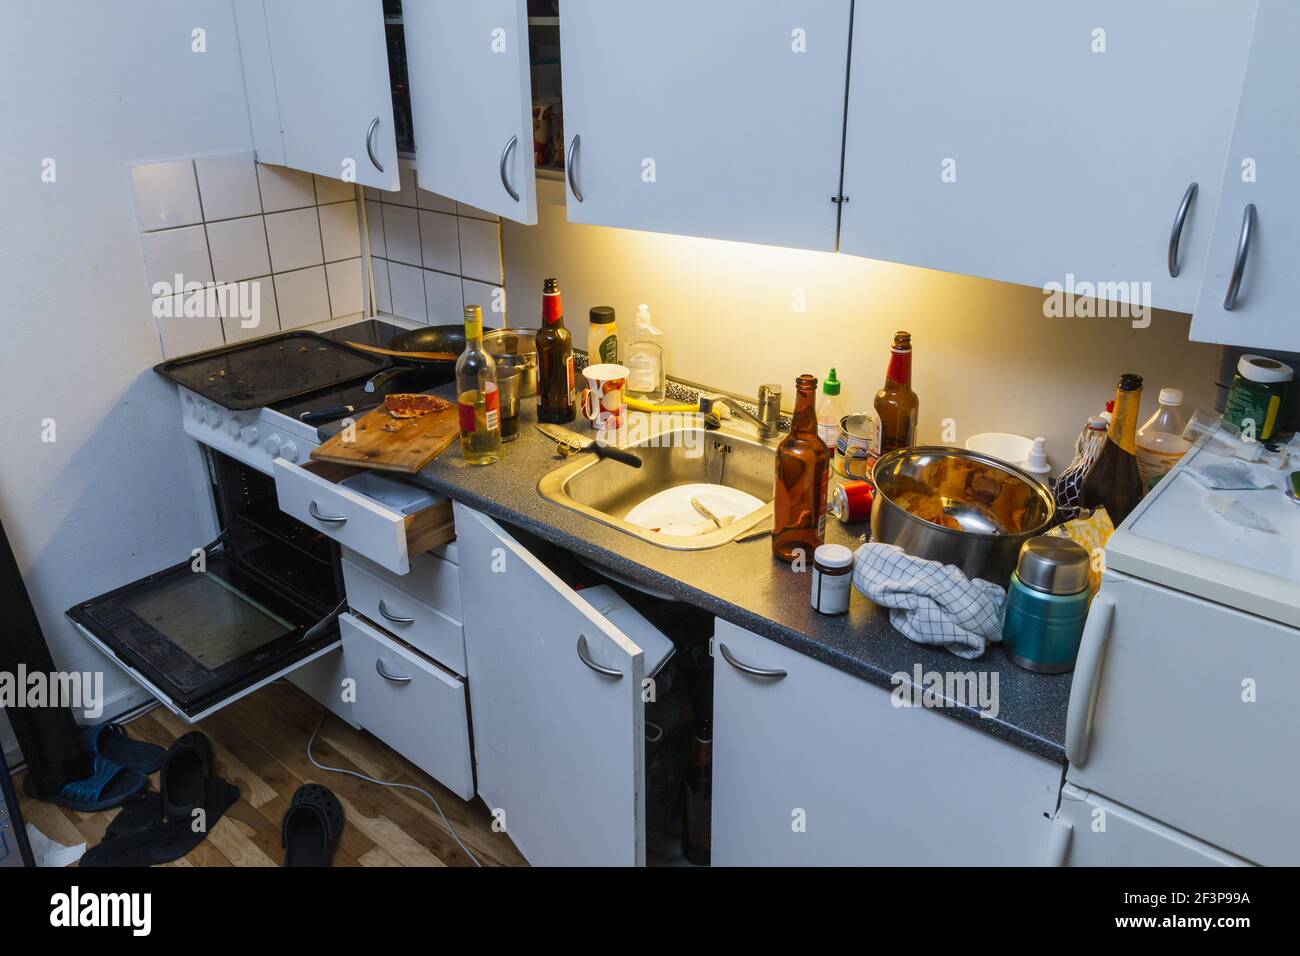 Messy kitchen after party. Beer bottles, plates in a sink, wine bottle Stock Photo